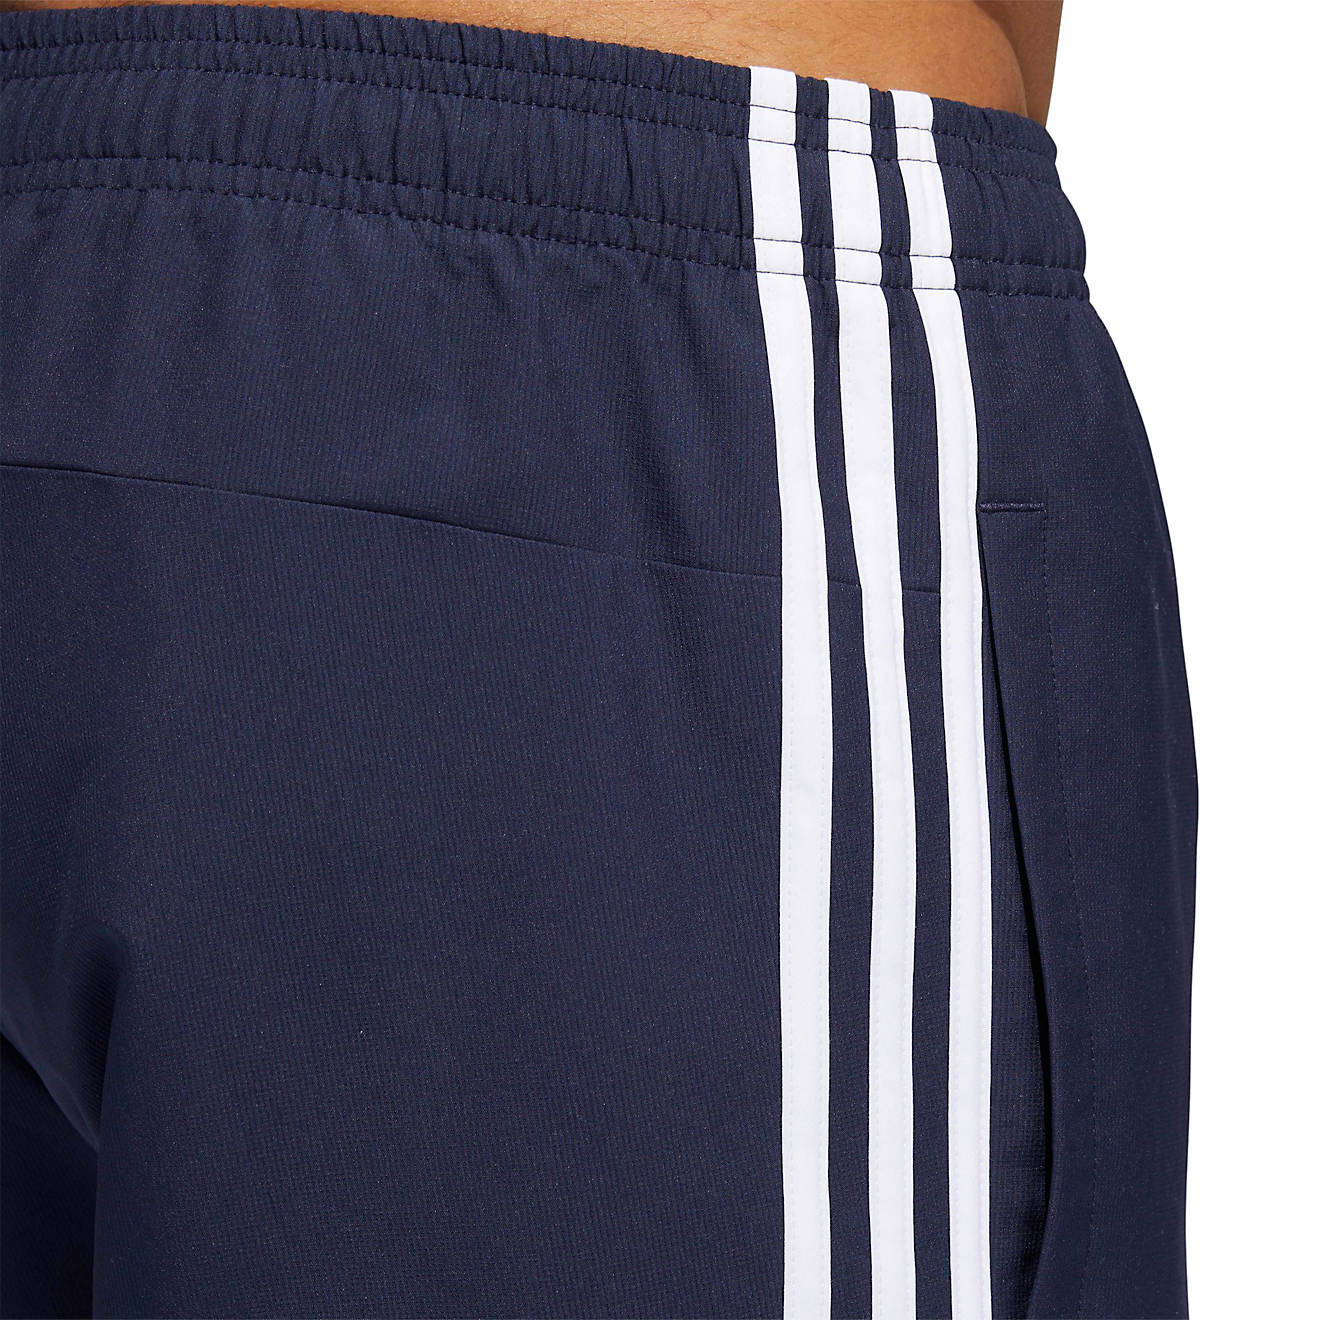 adidas Men's Essential 3-Stripe Woven OH Pants | Academy